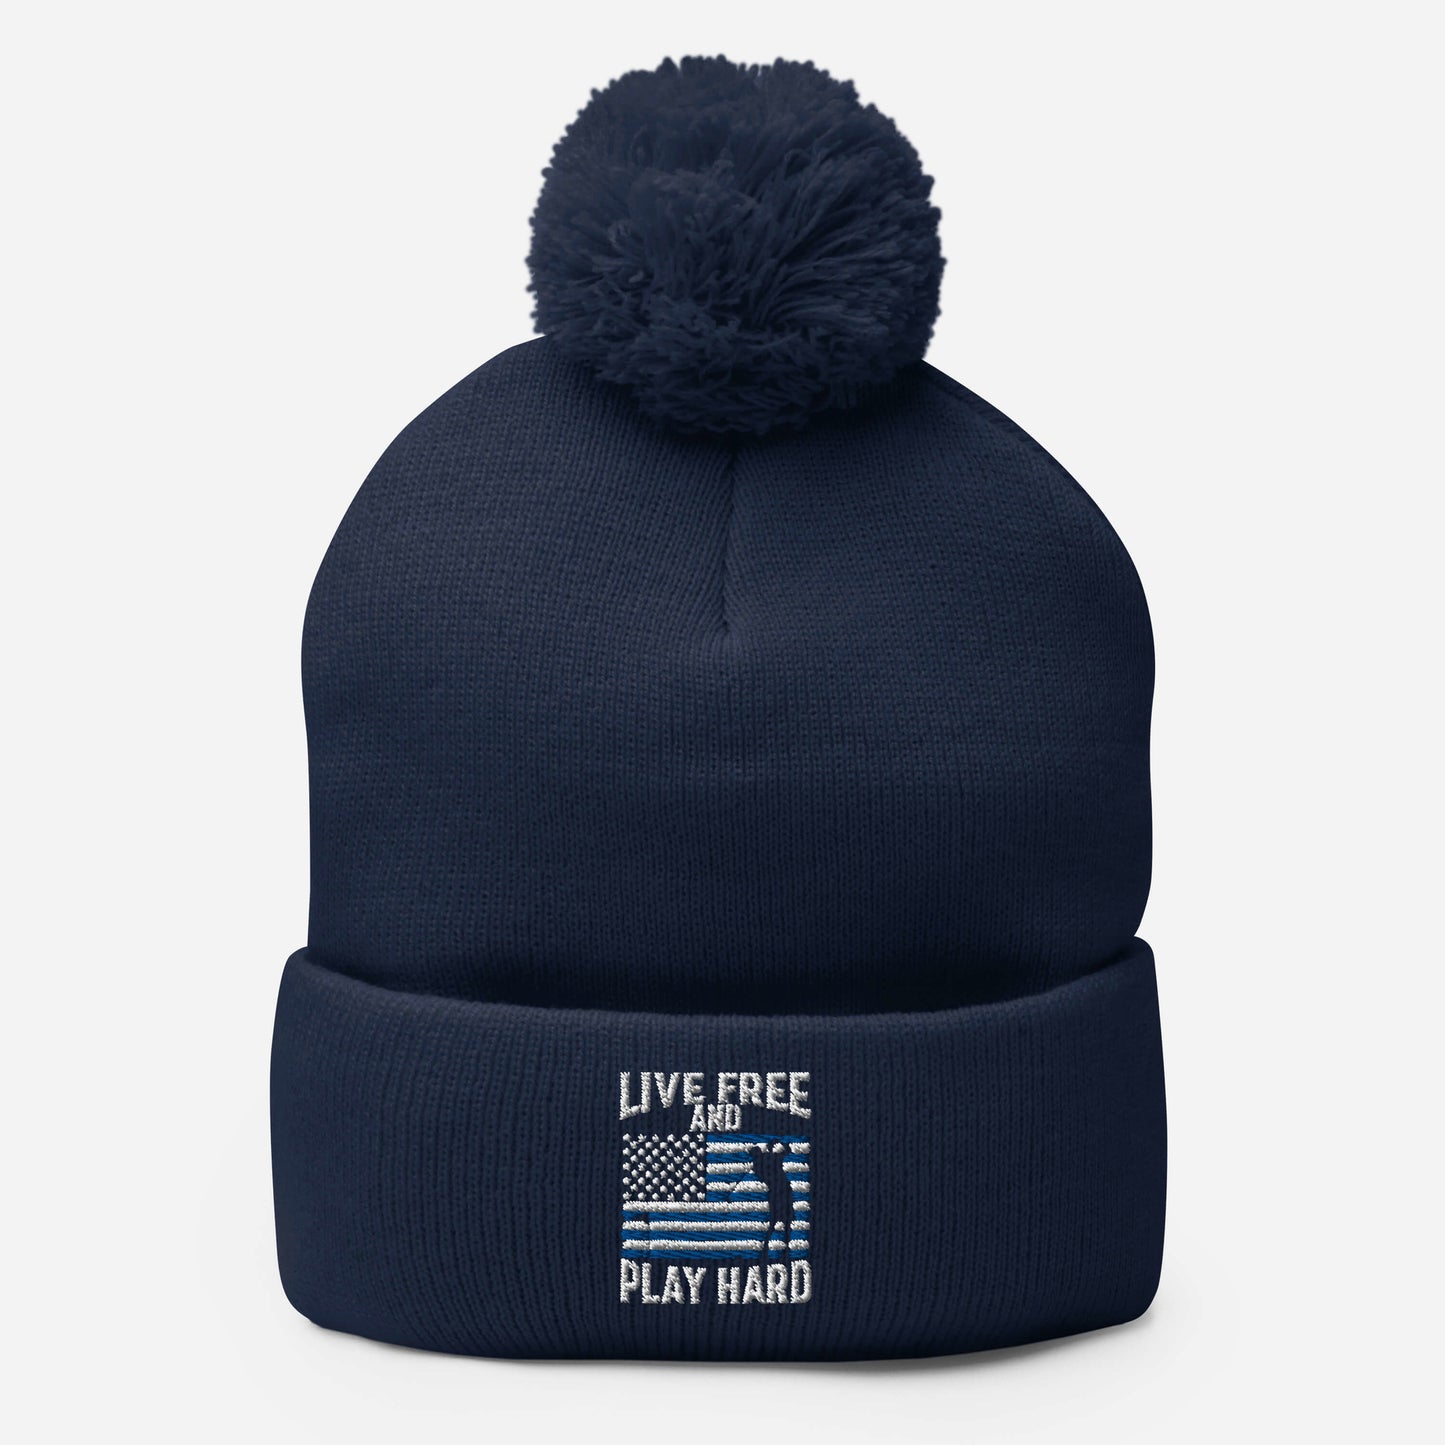 Live Free and Play Hard Beanie (Police Appreciation)